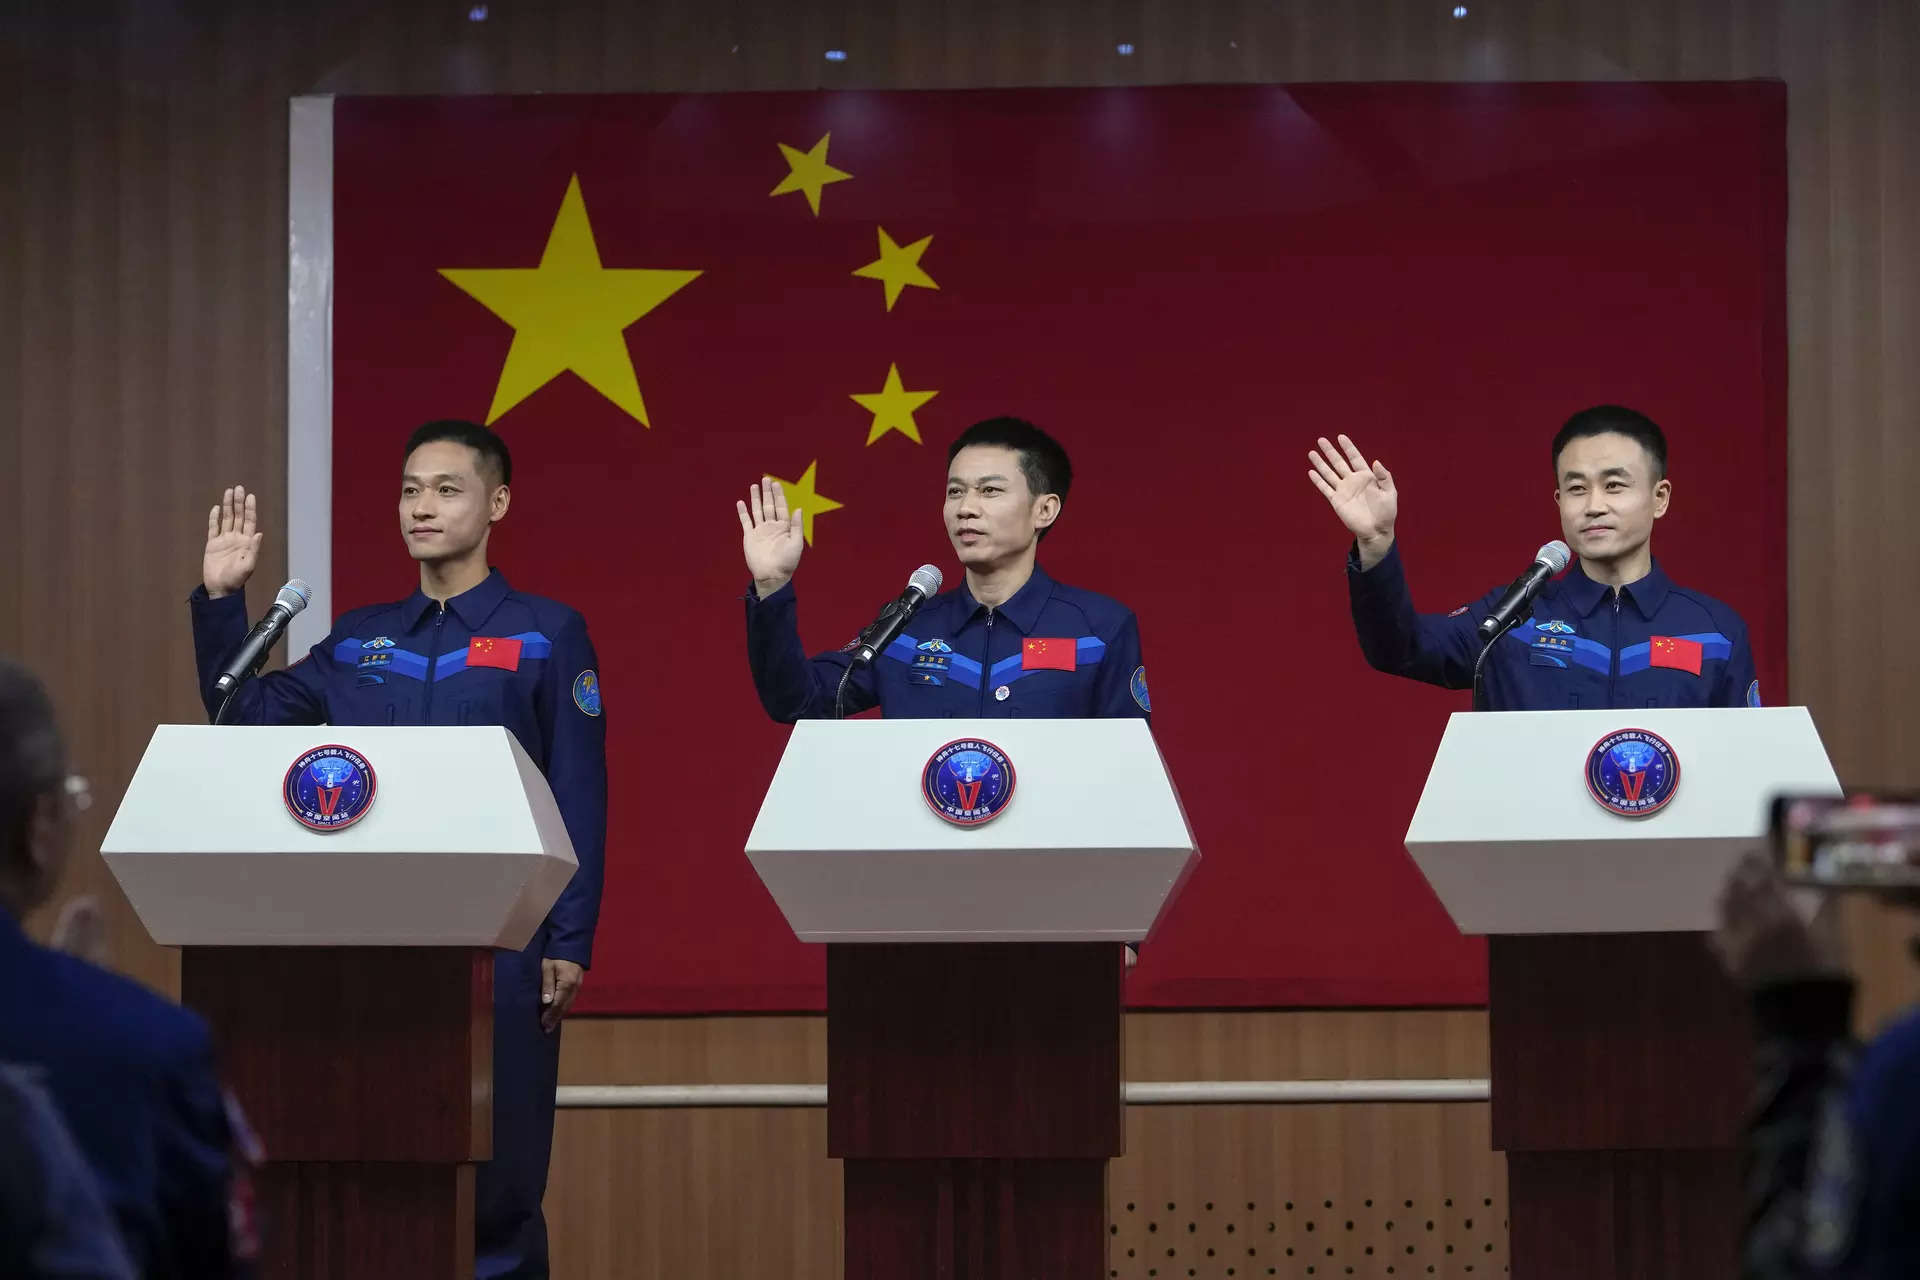 China's youngest astronauts go to space